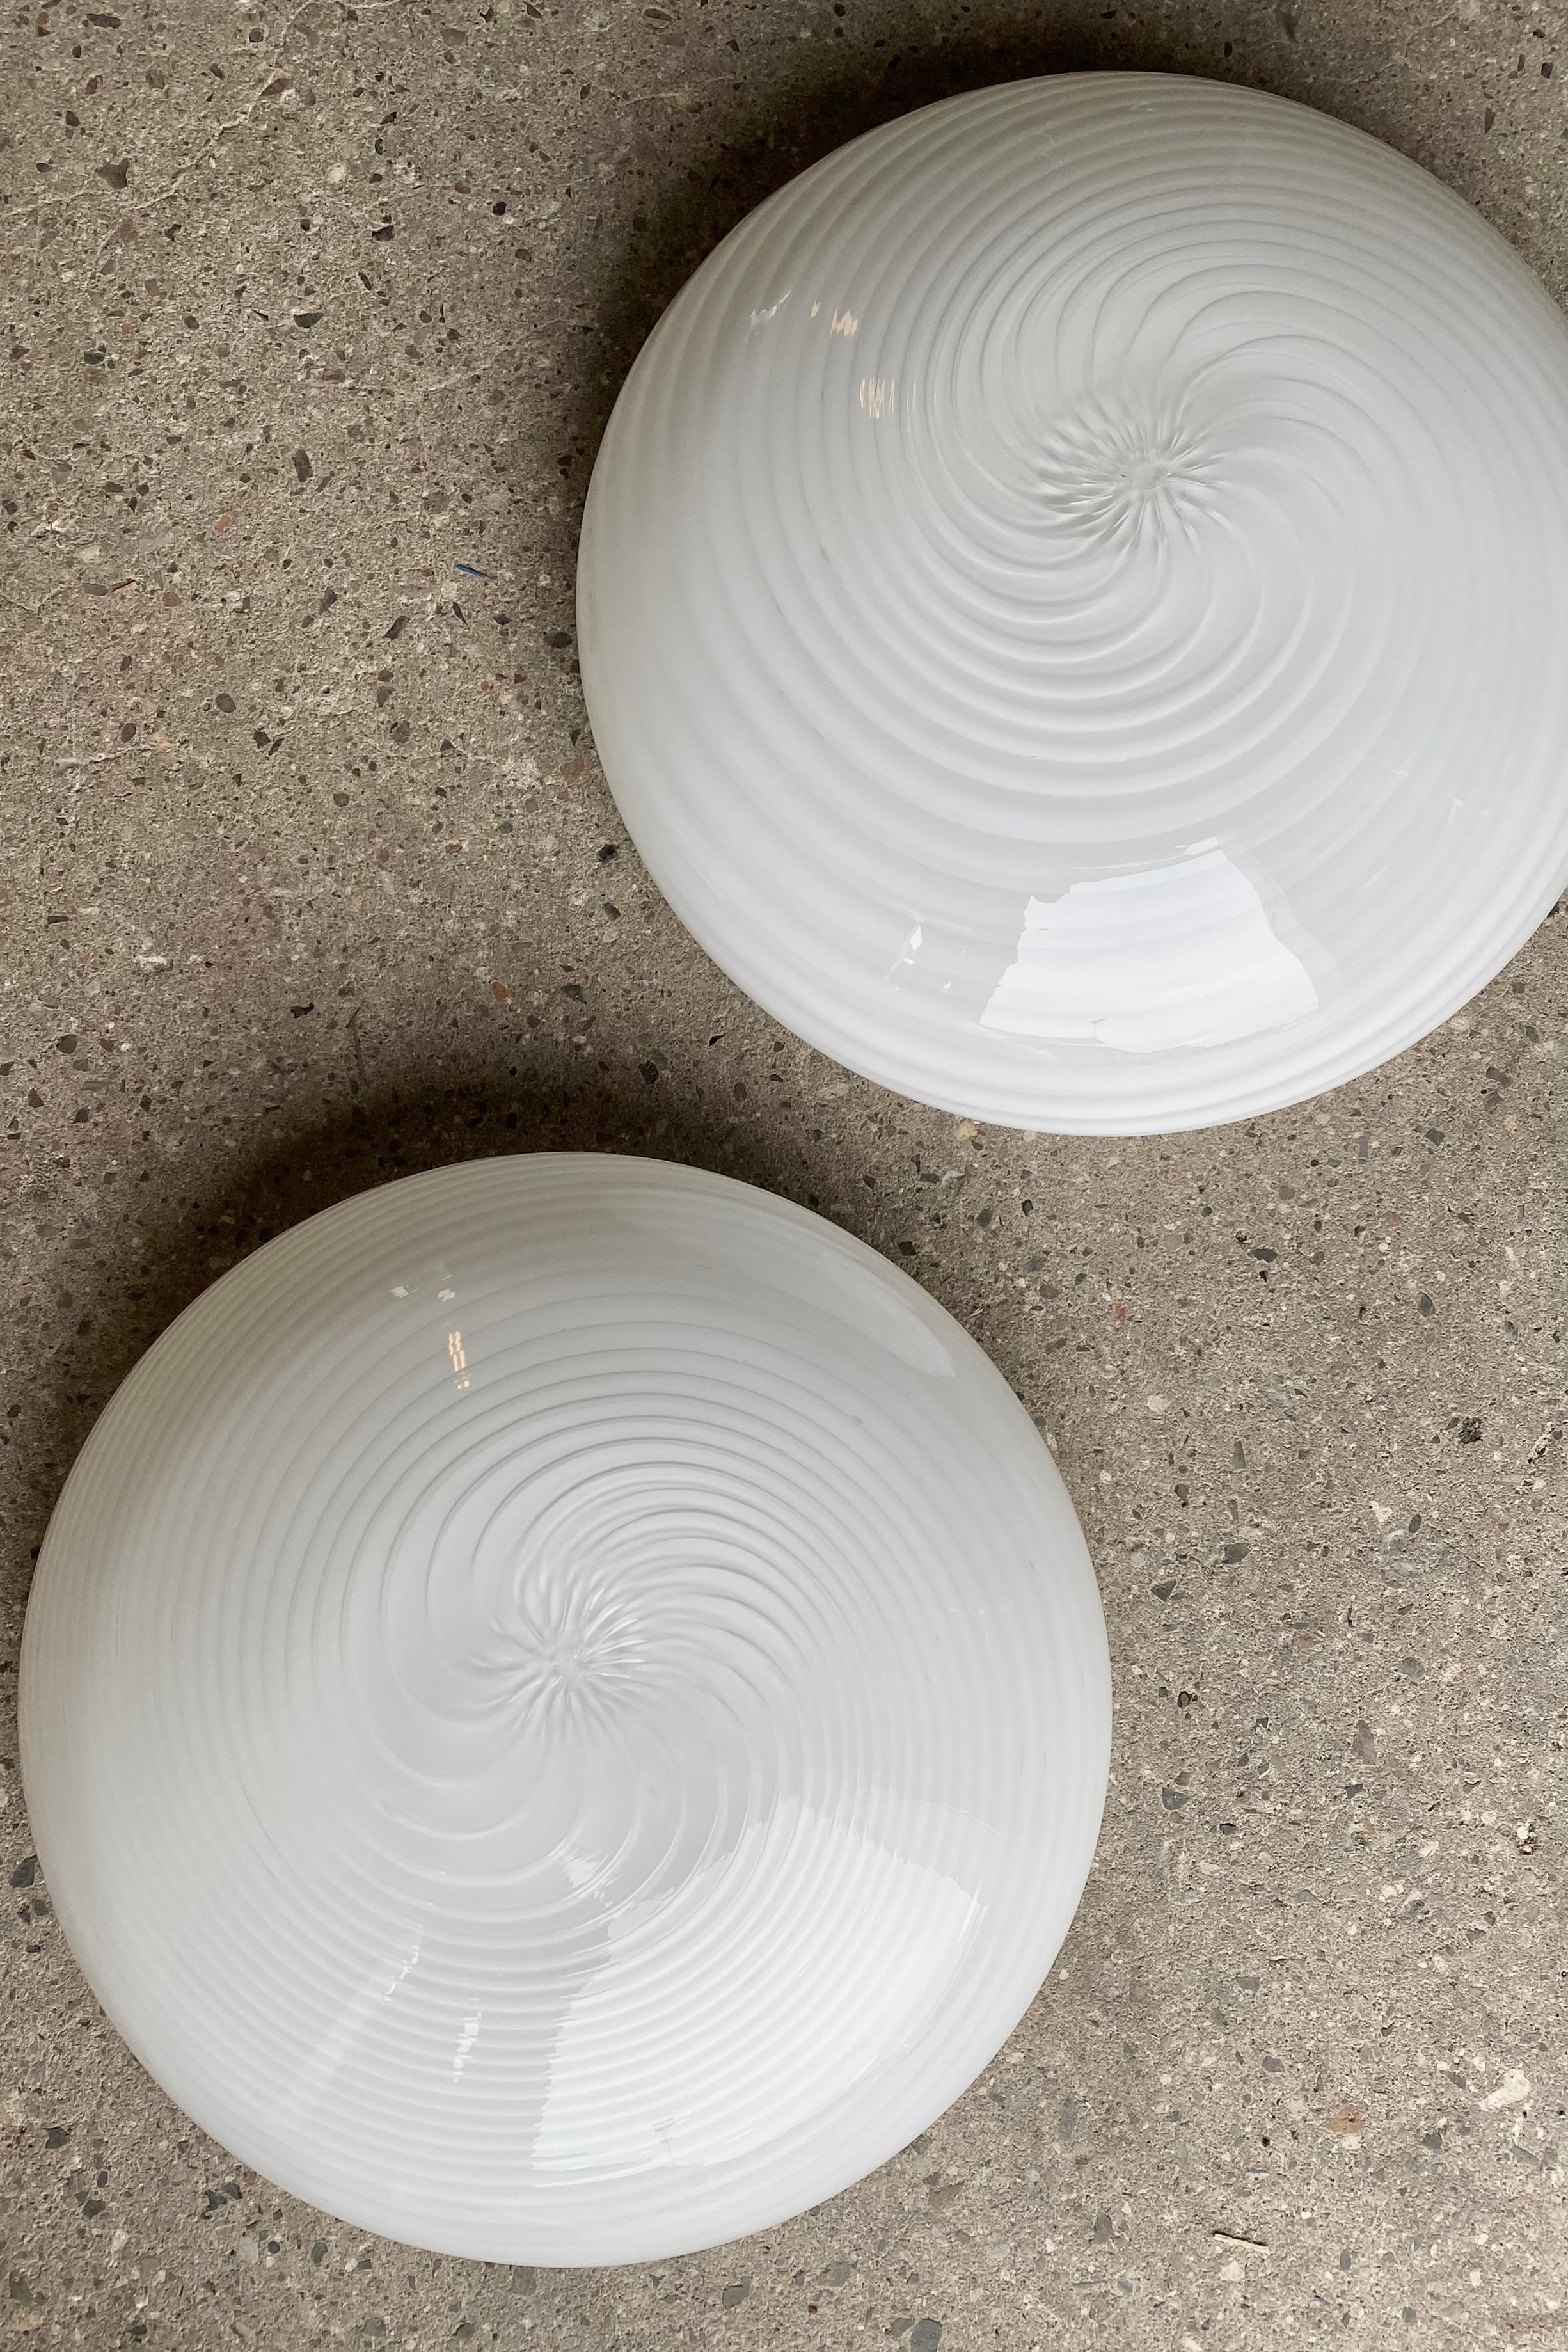 Pair of Murano plafond ceiling lamp / wall lamp. Mouth-blown white opal glass with swirl and white base. E27 socket. Handmade in Italy, 1970s. Original labels. 
D:38 cm⁠⁠ H:14 cm